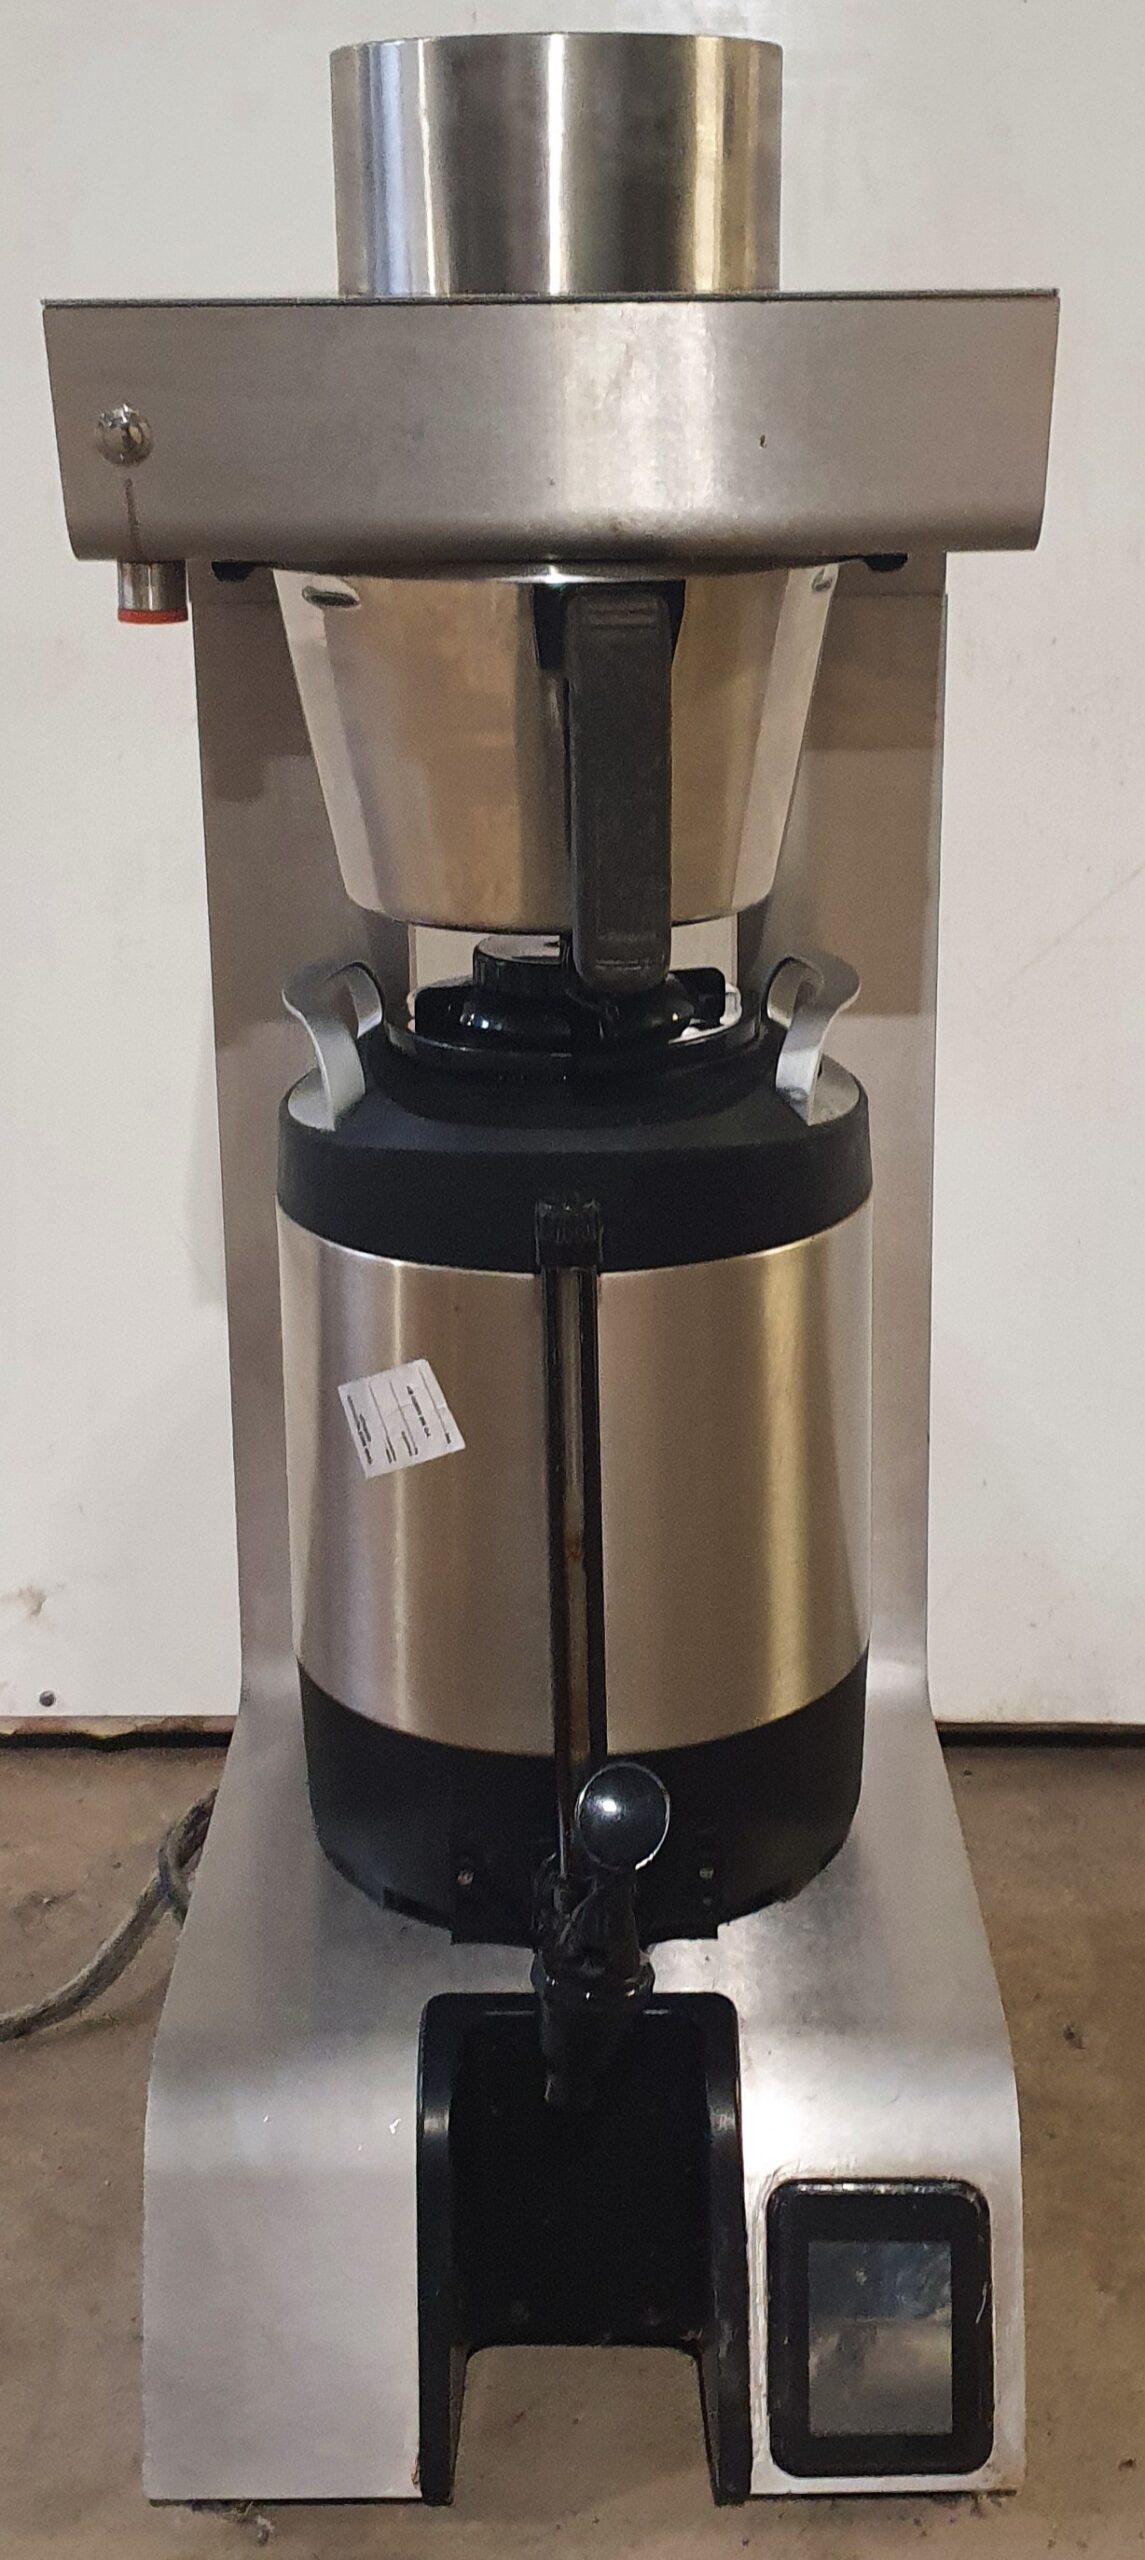 MARCO Jet 6 Bulk Brewer with Urn